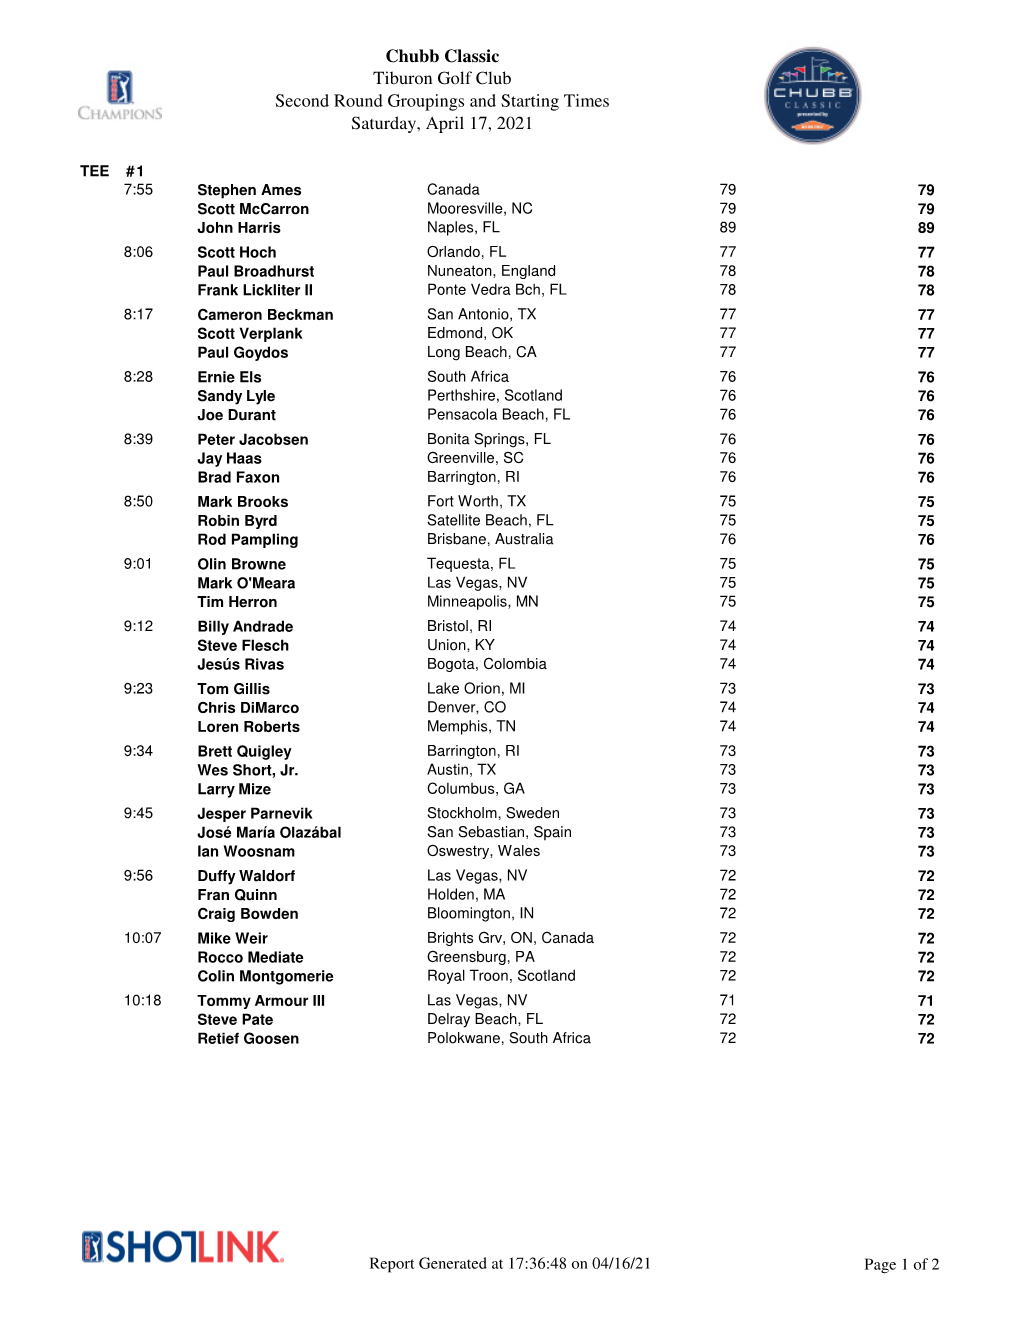 Chubb Classic Tiburon Golf Club Second Round Groupings and Starting Times Saturday, April 17, 2021